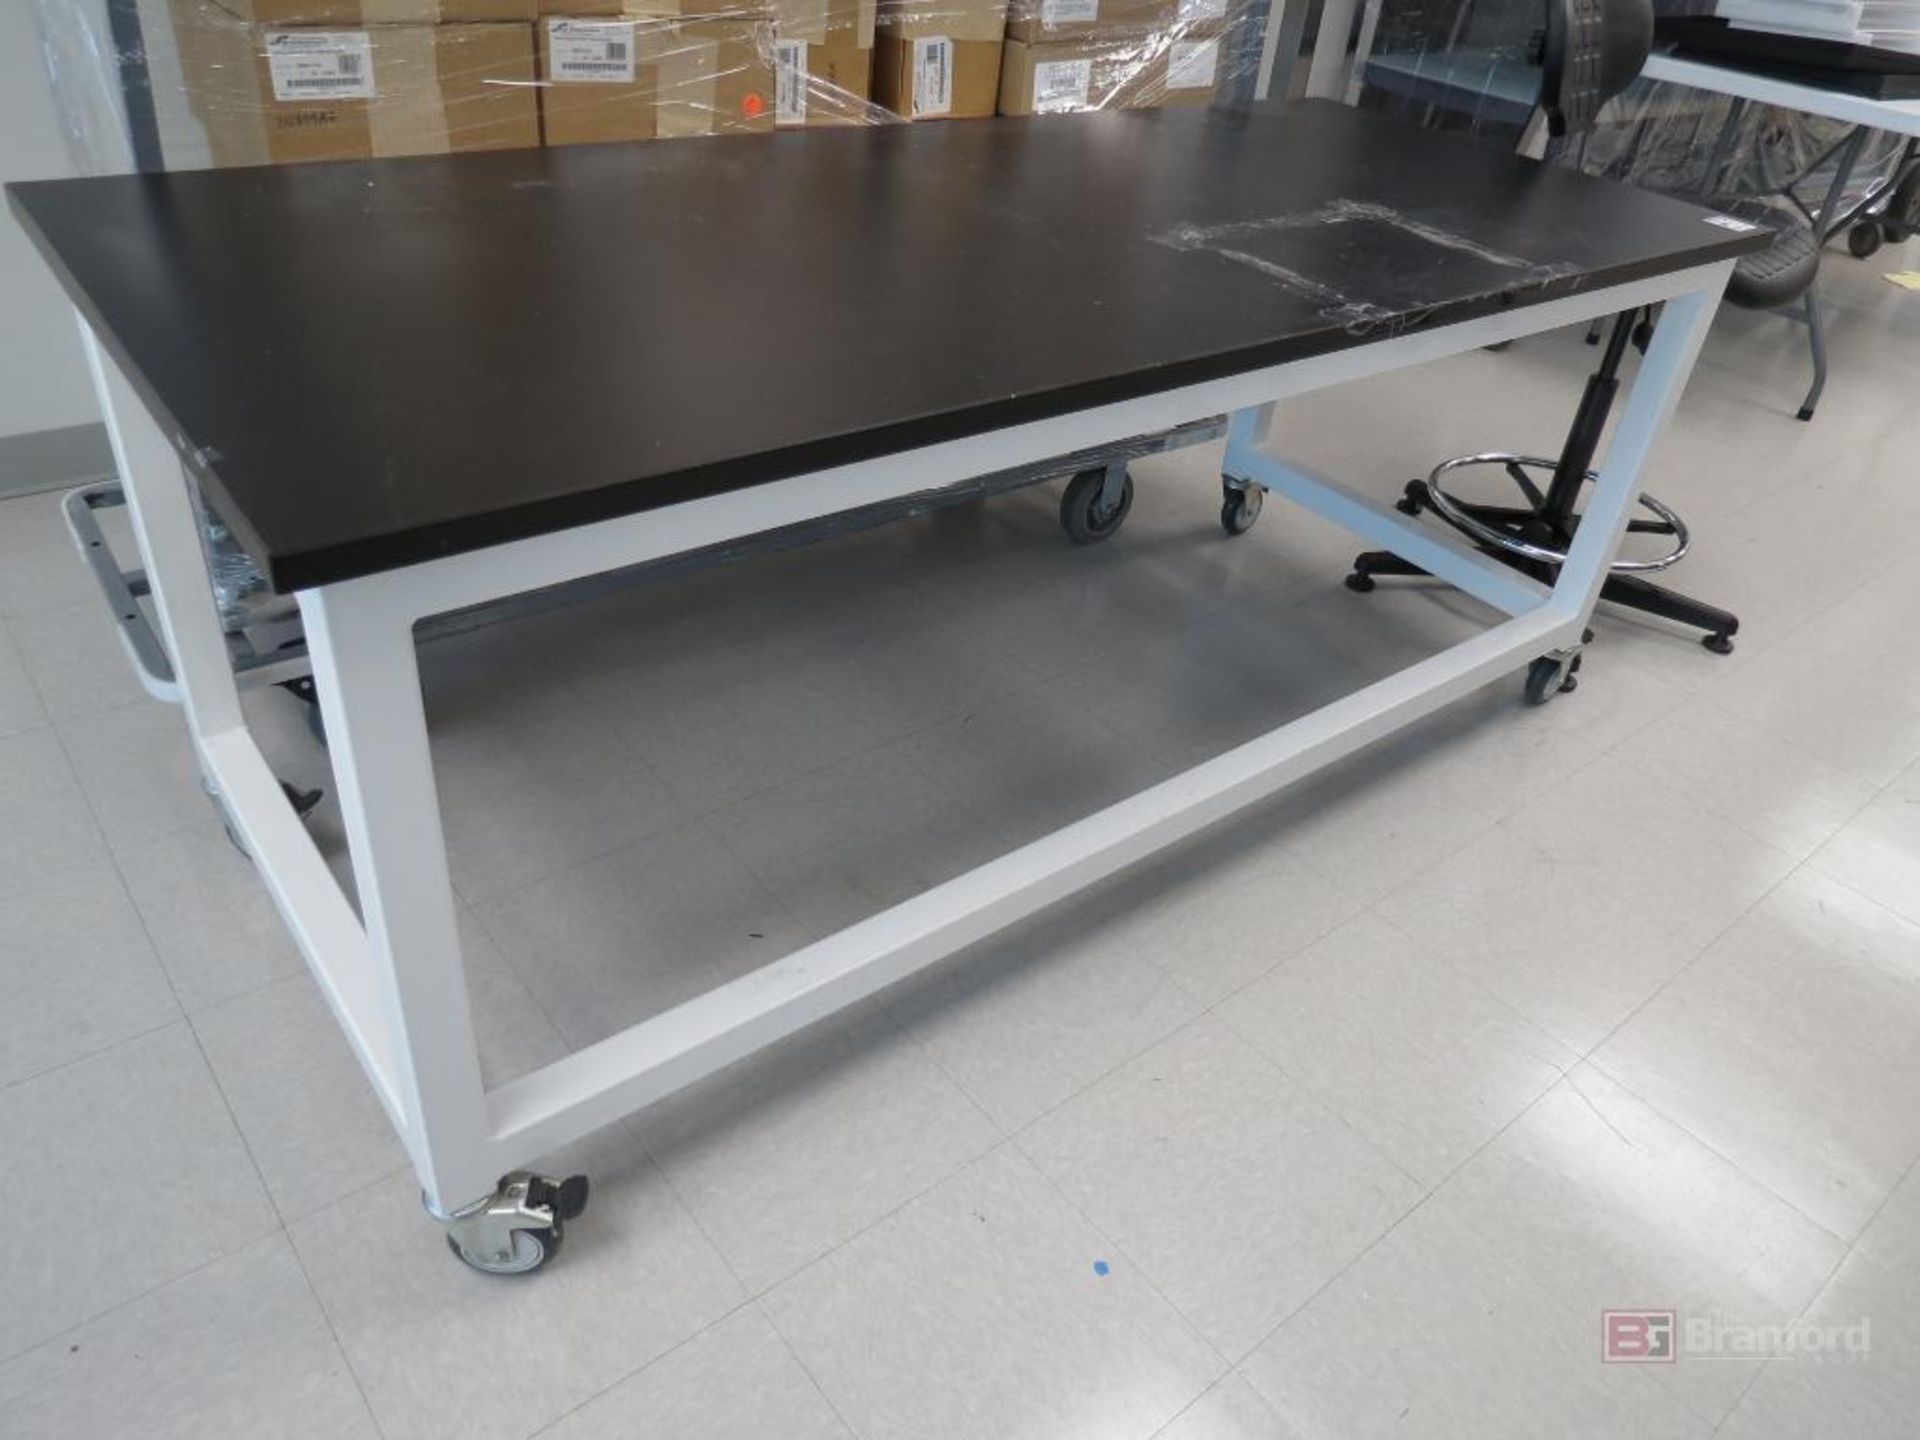 Portable Lab Bench & Uline H-1375 Stool - Image 2 of 4